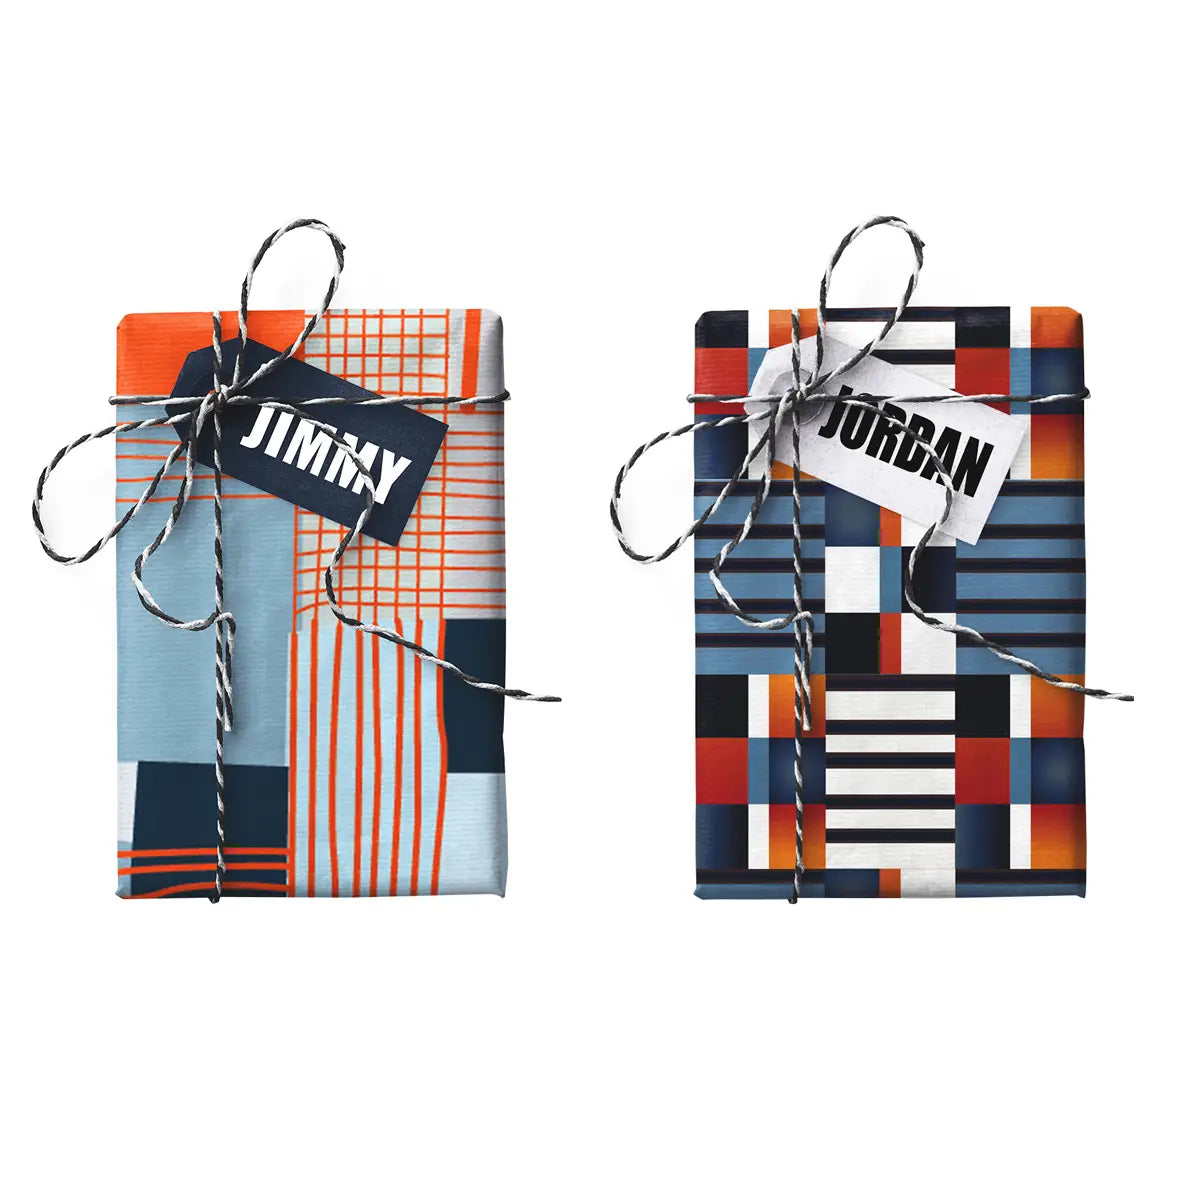 Jimmy-Jordan Double Sided Stone Gift Wrapping Paper